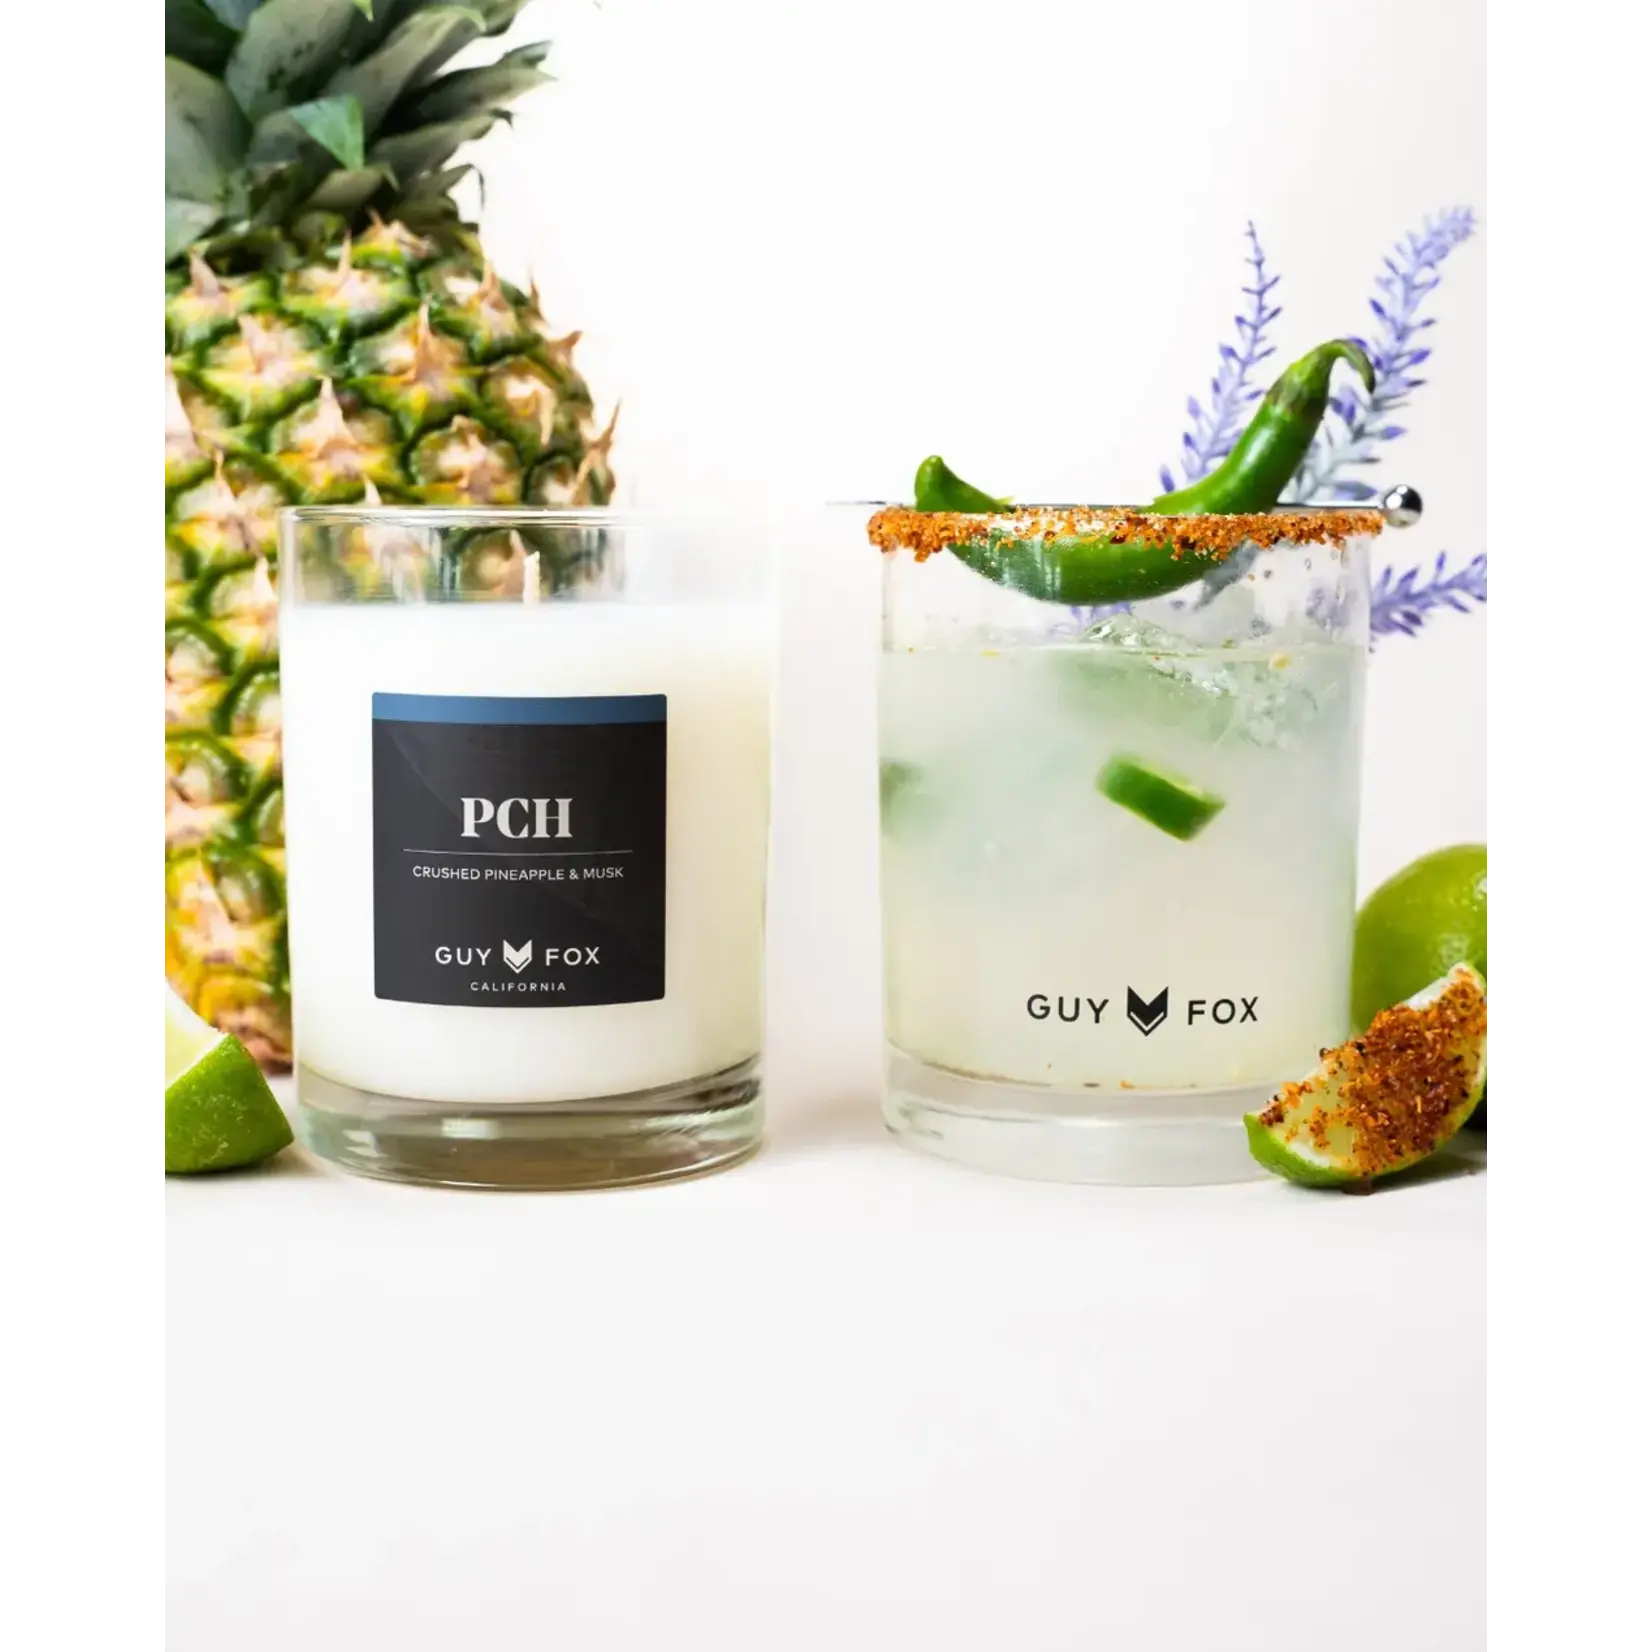 Guy Fox Pch Coconut Wax Candle - Crushed Pineapple + Musk